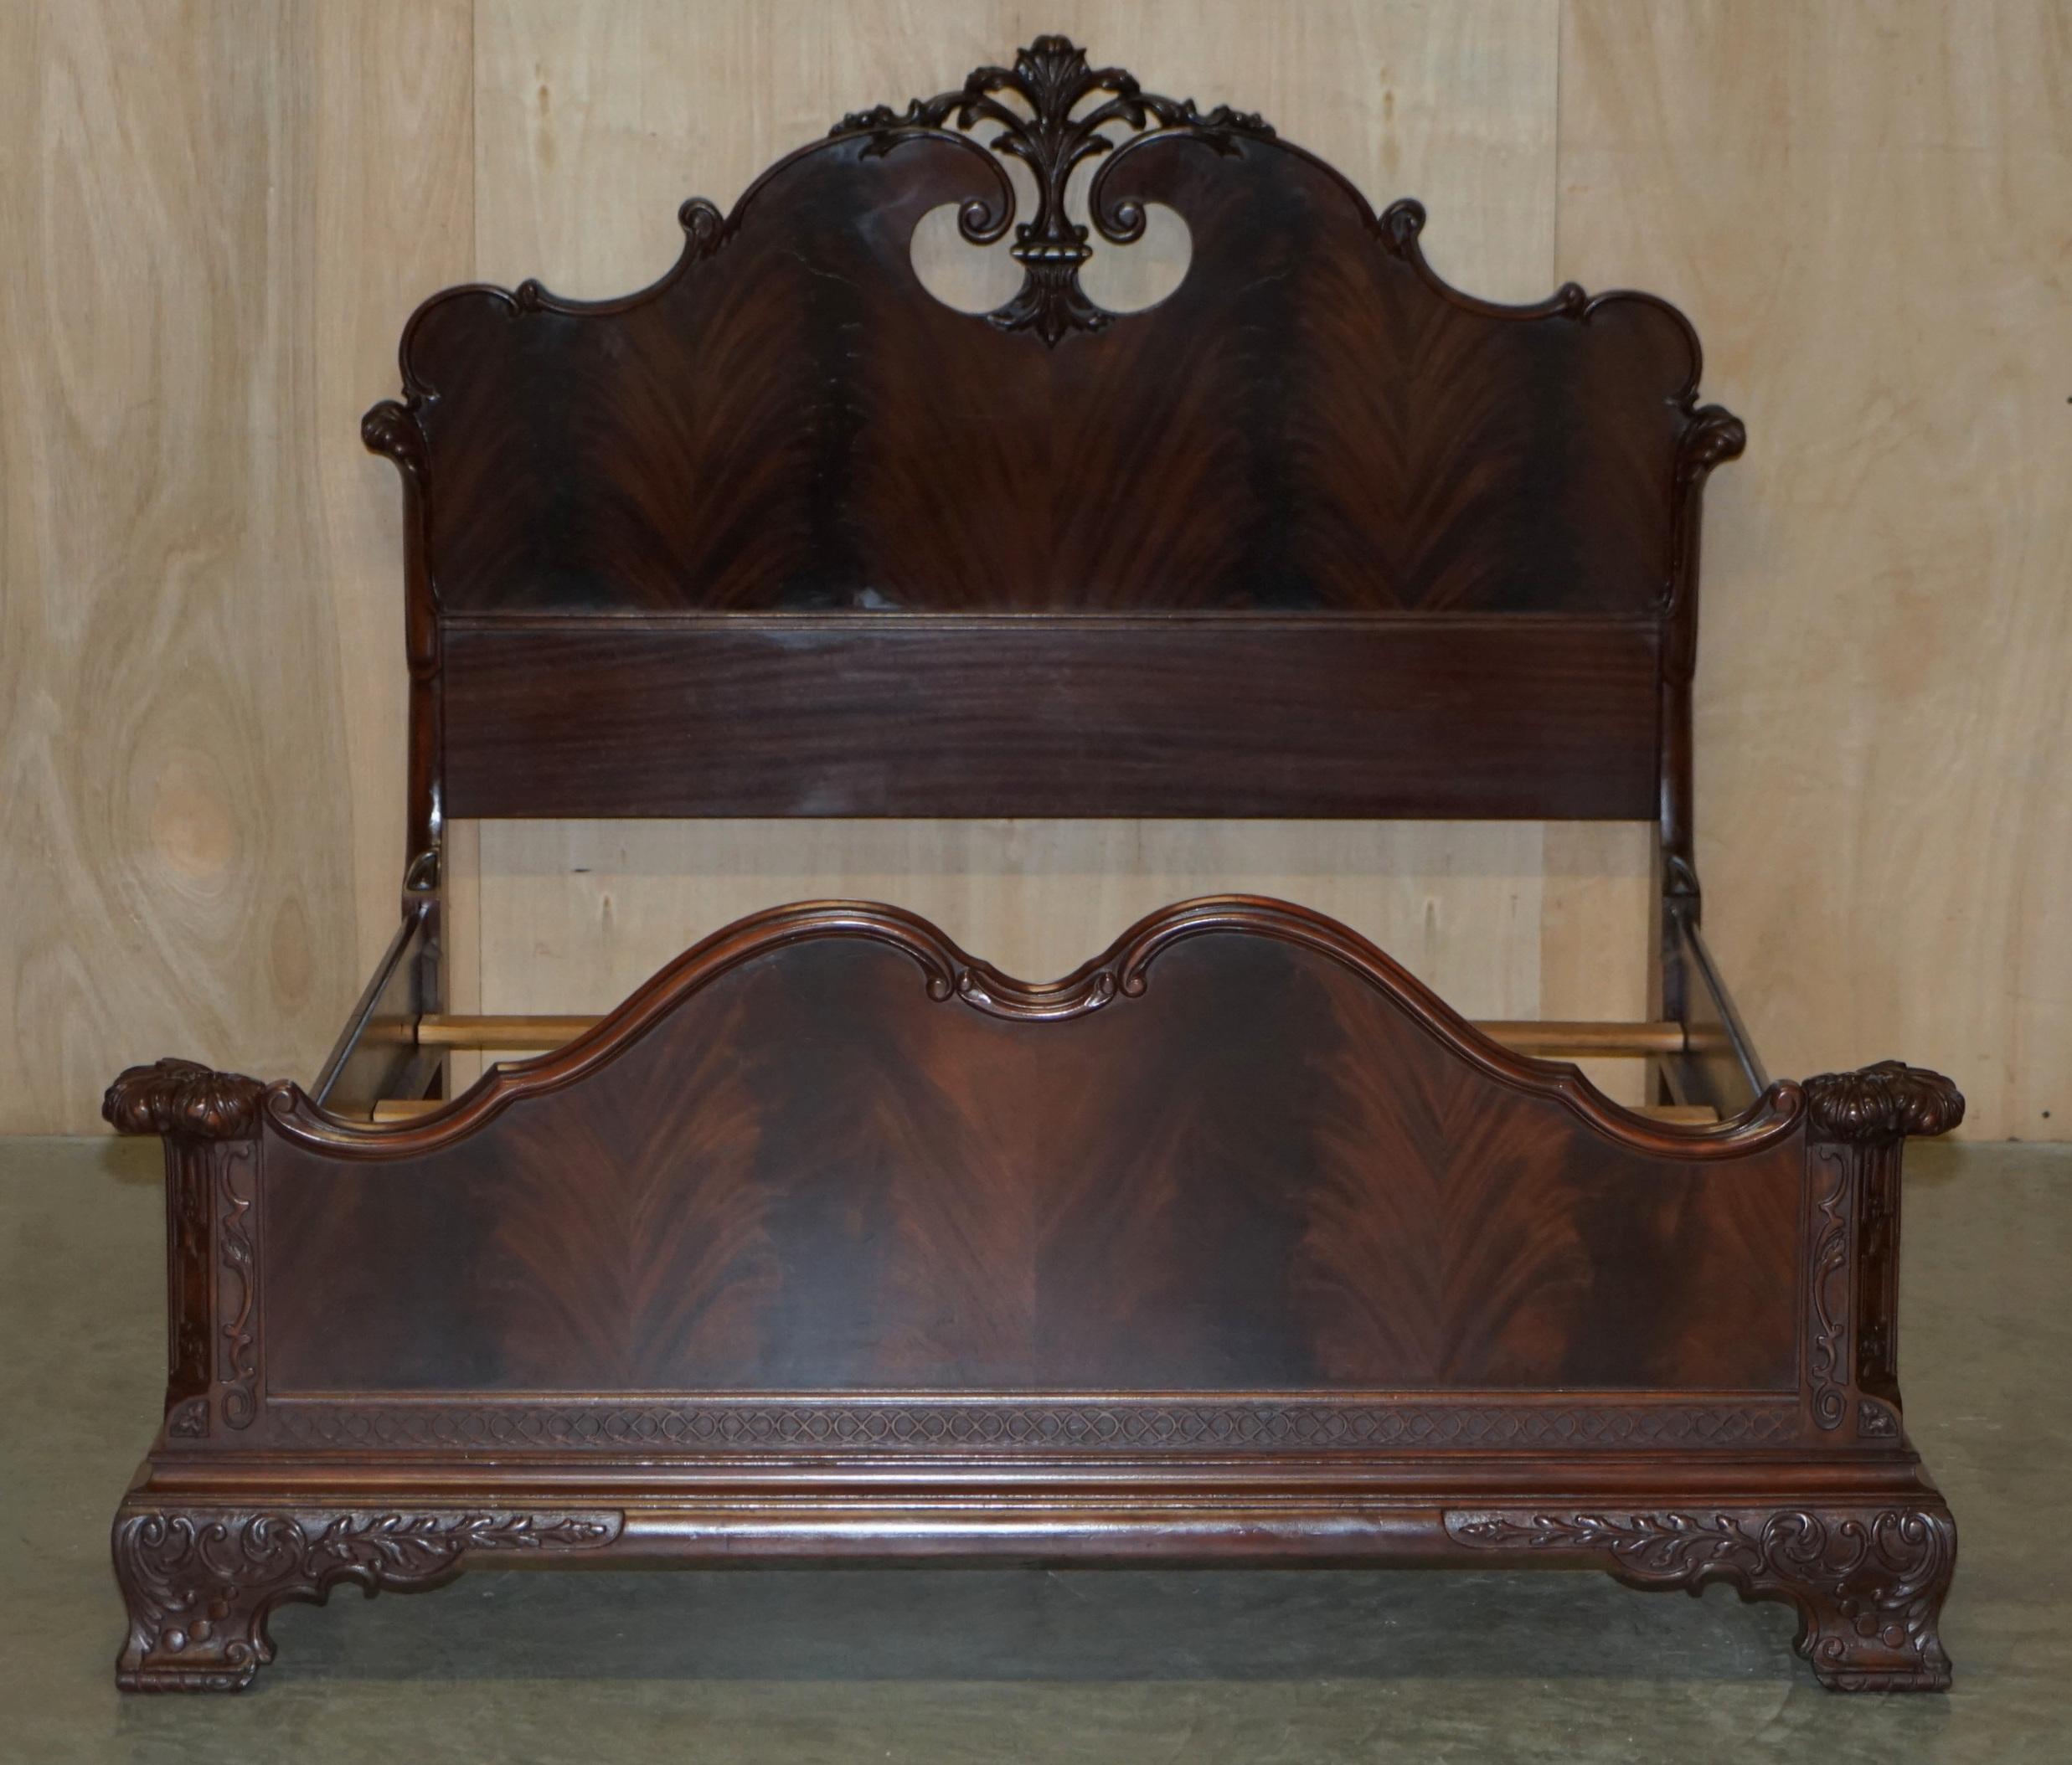 Royal House Antiques

Royal House Antiques is delighted to offer for sale this absolutely sublime quality, hand carved Honduras Mahogany double bed frame

Please note the delivery fee listed is just a guide, it covers within the M25 only for the UK